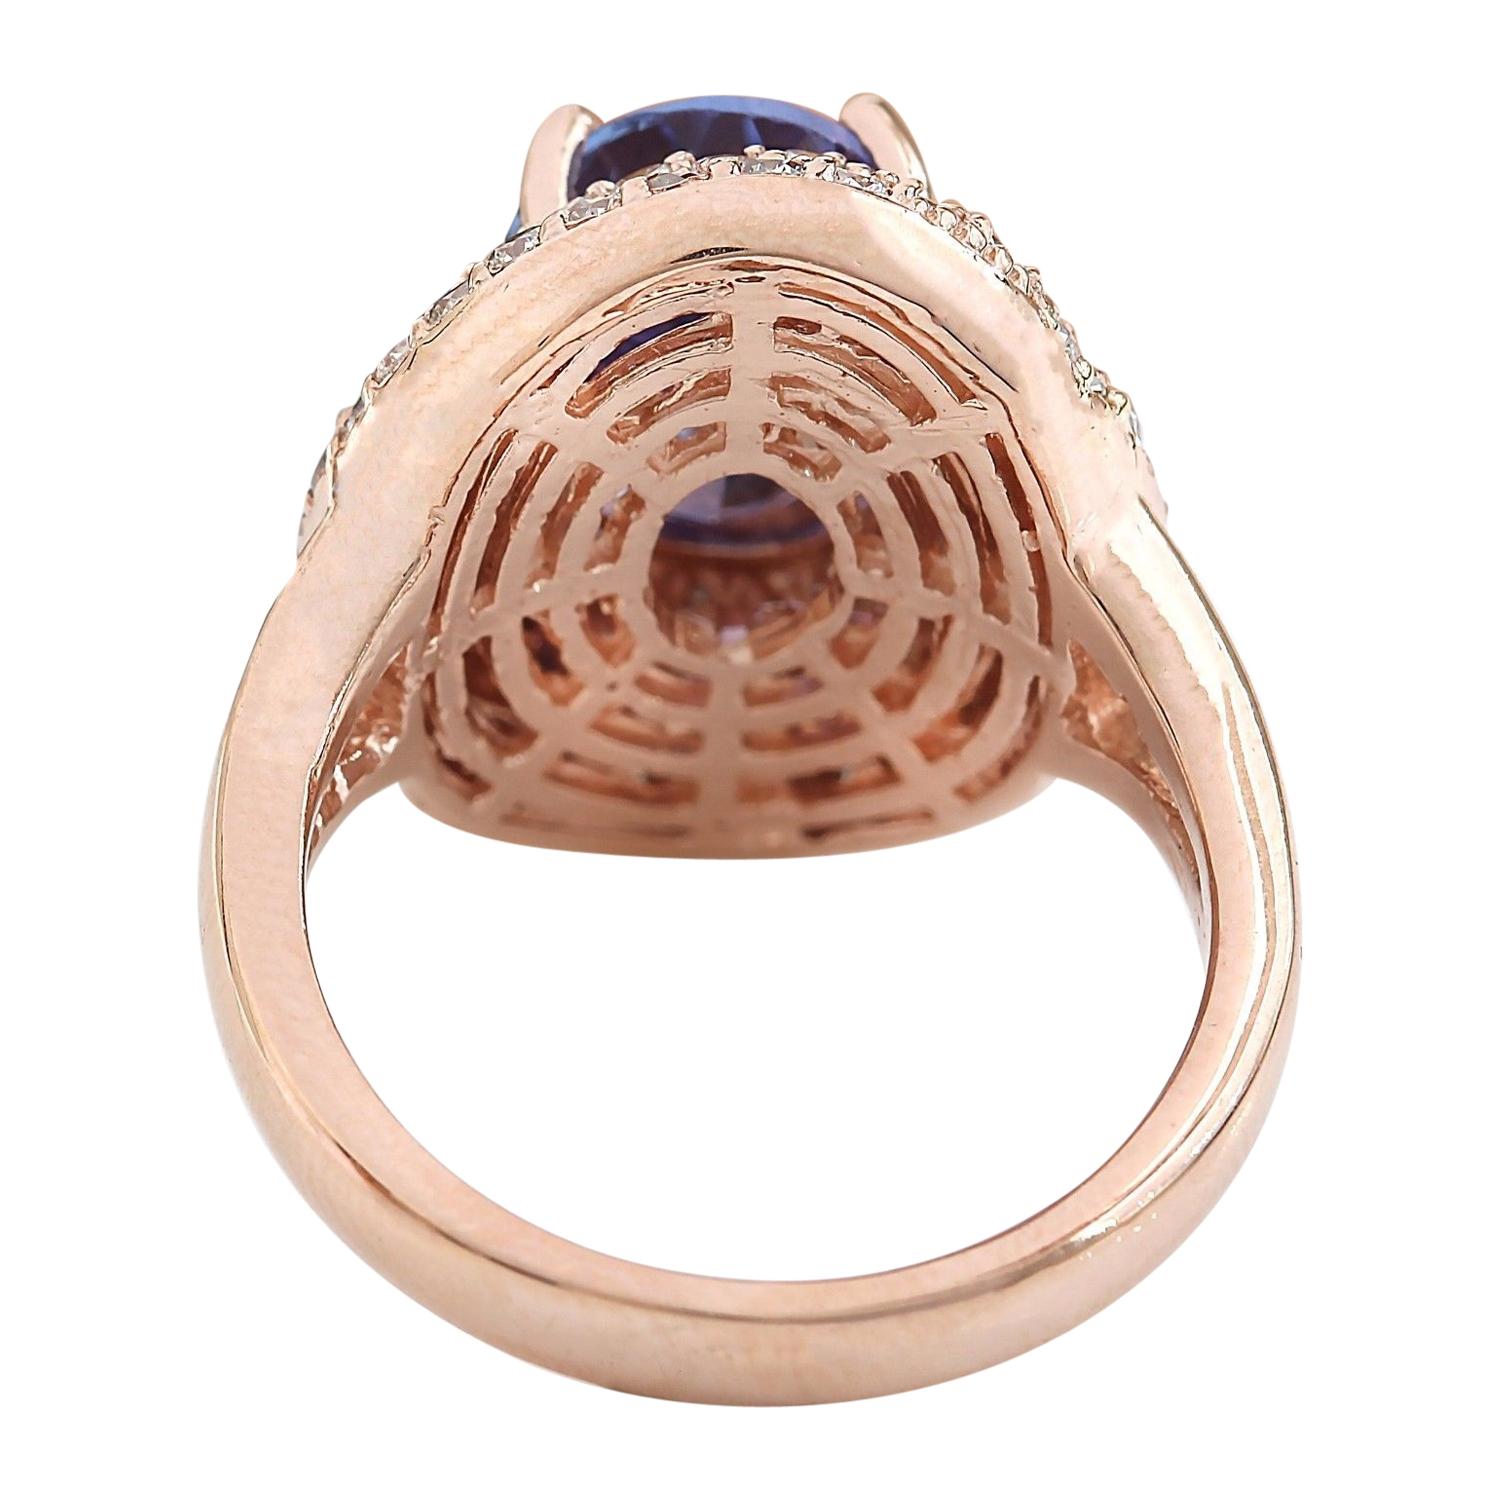 Oval Cut Exquisite Natural Tanzanite Diamond Ring In 14 Karat Solid Rose Gold  For Sale